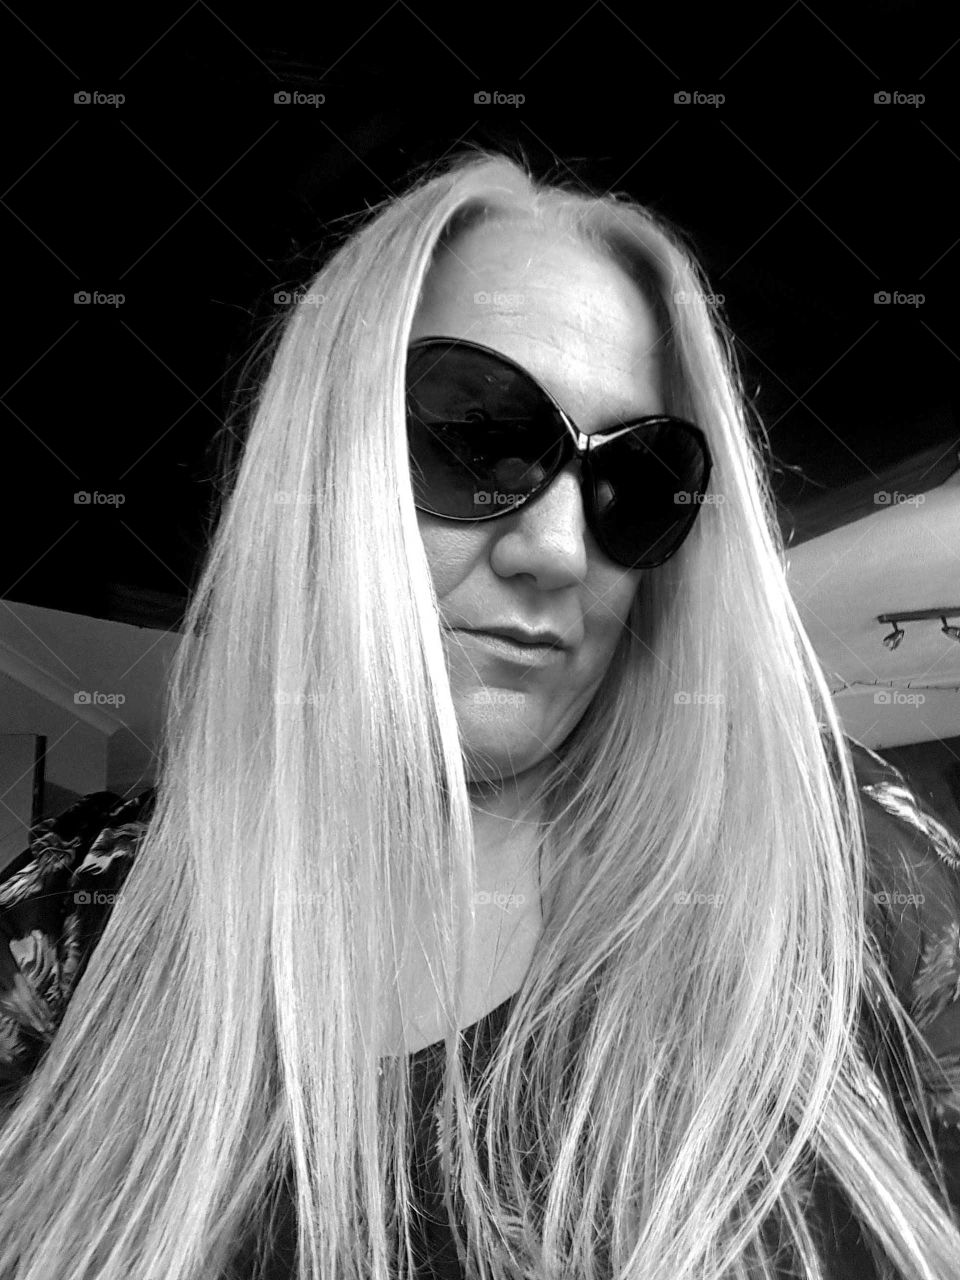 A black and white pick of my hair. I just had it colored and straightened by my daughter inlaw for a new look.